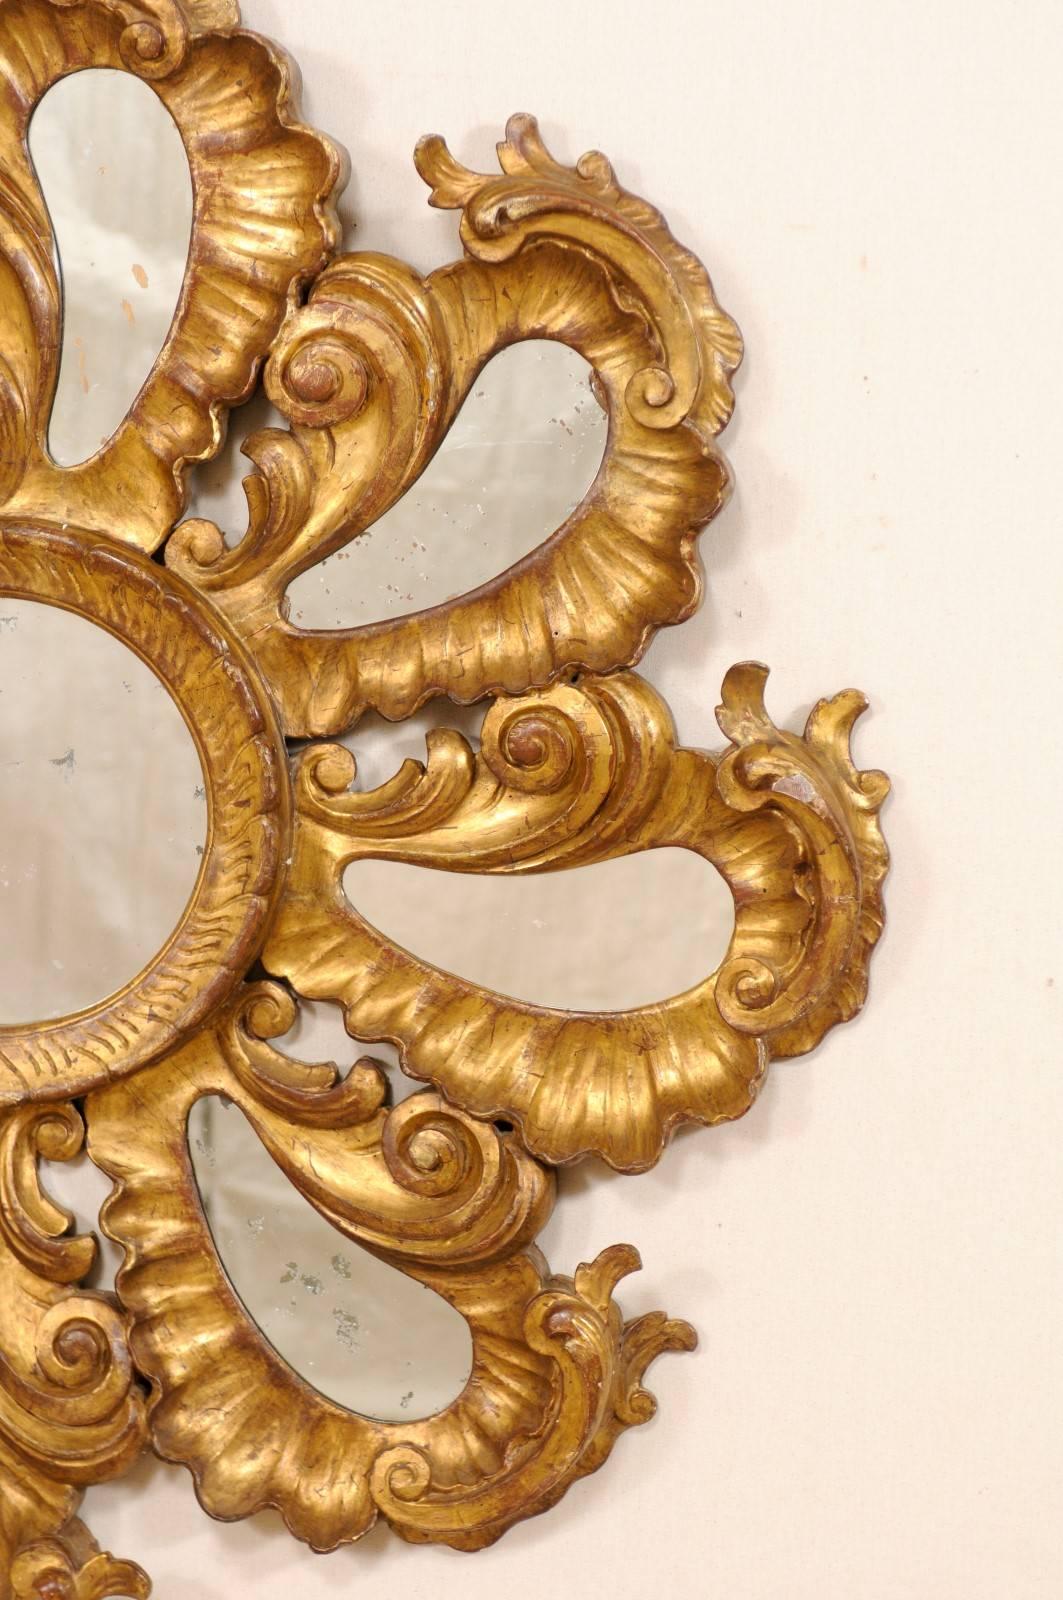 20th Century Exquisite Italian Vintage Carved Giltwood Circular Repeating Petal Wall Mirror